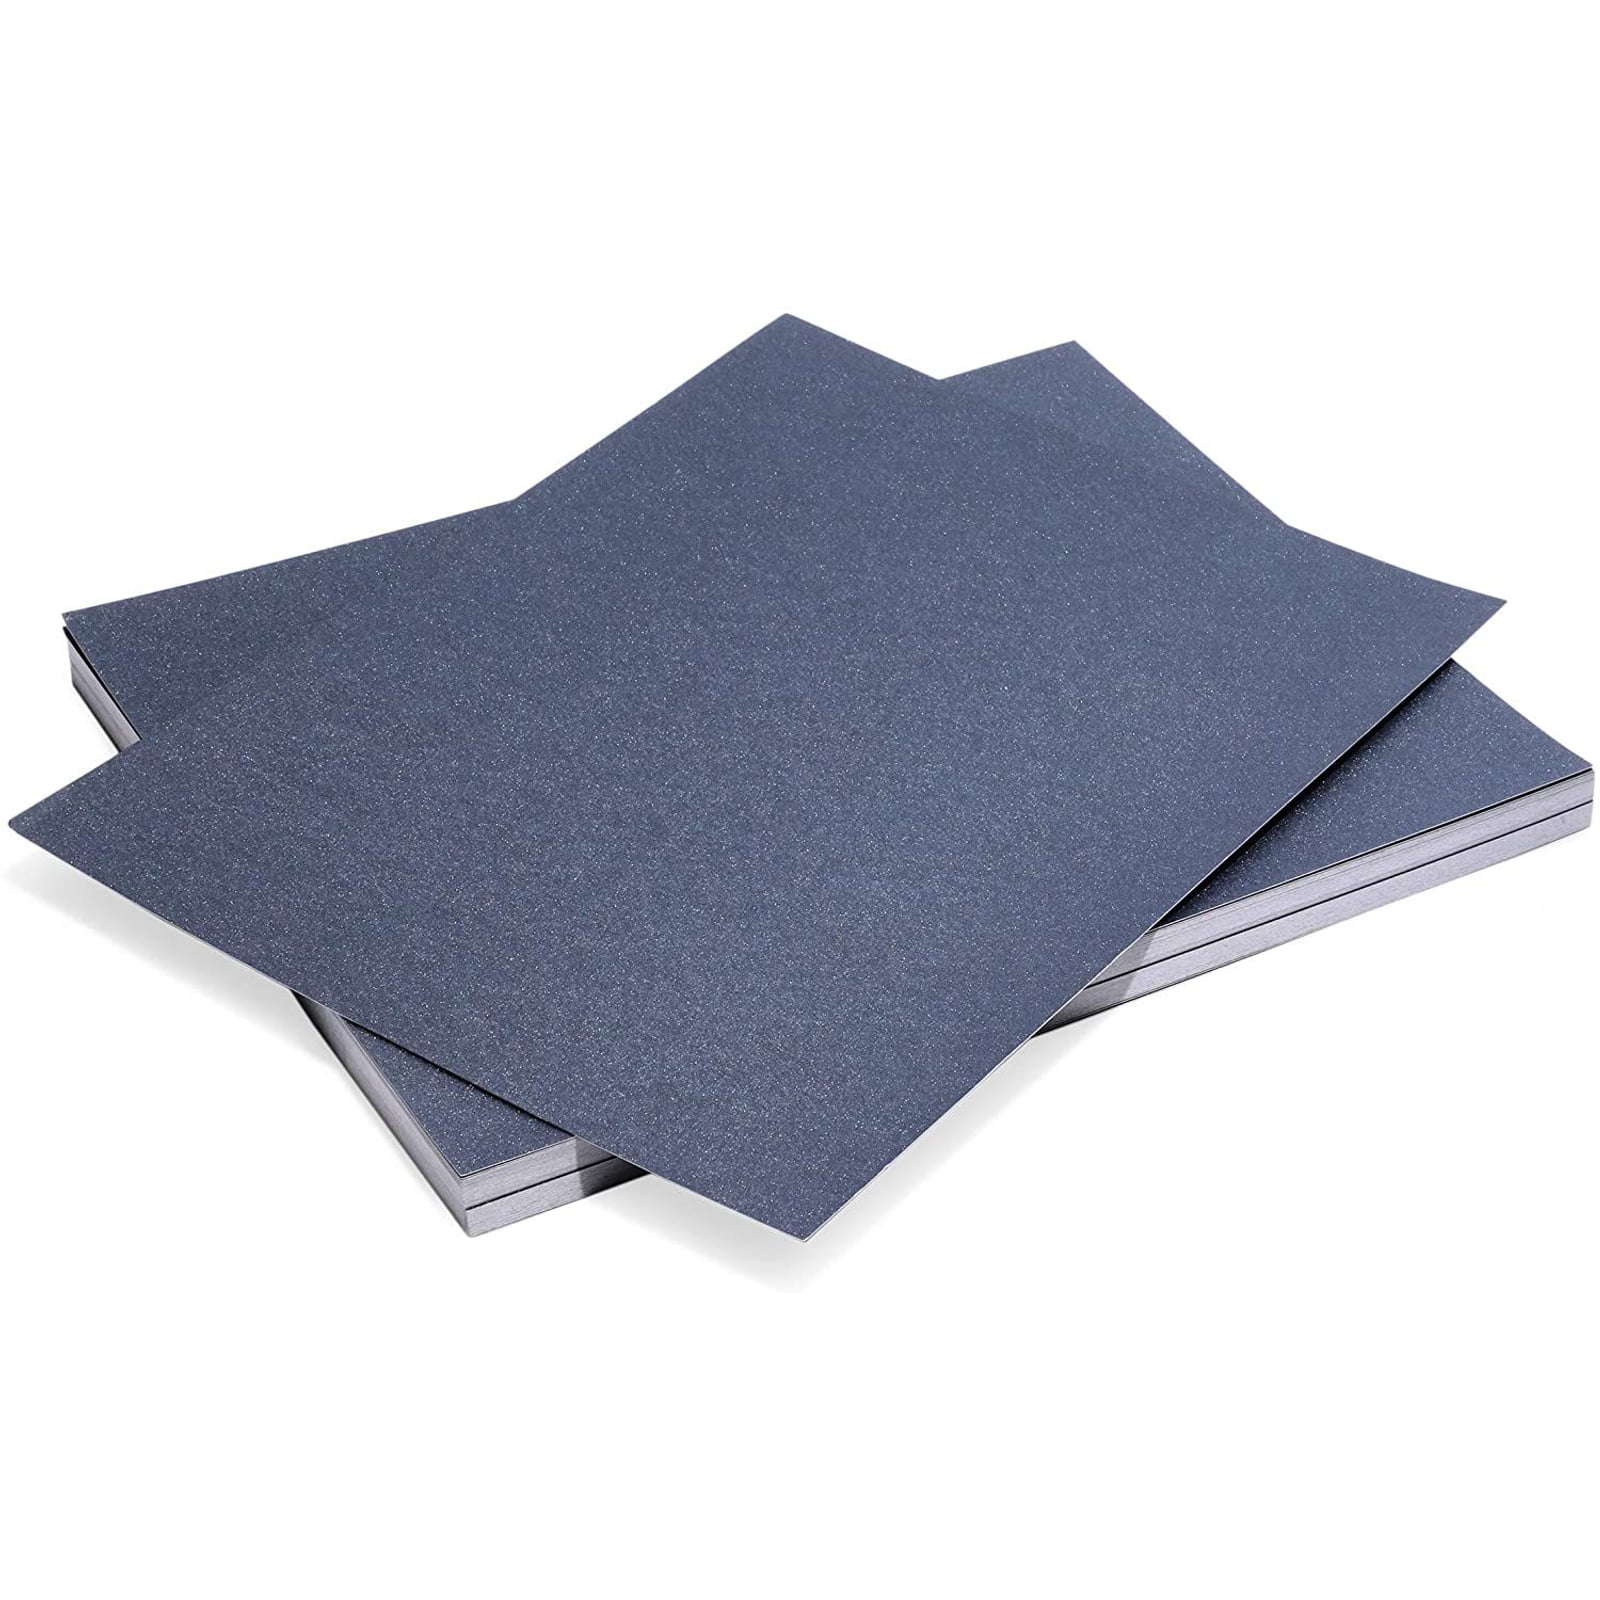  36 Sheets Navy Blue Shimmer Cardstock, 8.5 x 11 Metallic  Cardstock Paper, 250gsm/92lb Cover, Double Sided Pearlescent Paper Card  Stock for Invitations, Card Making, DIY Crafts : Arts, Crafts 